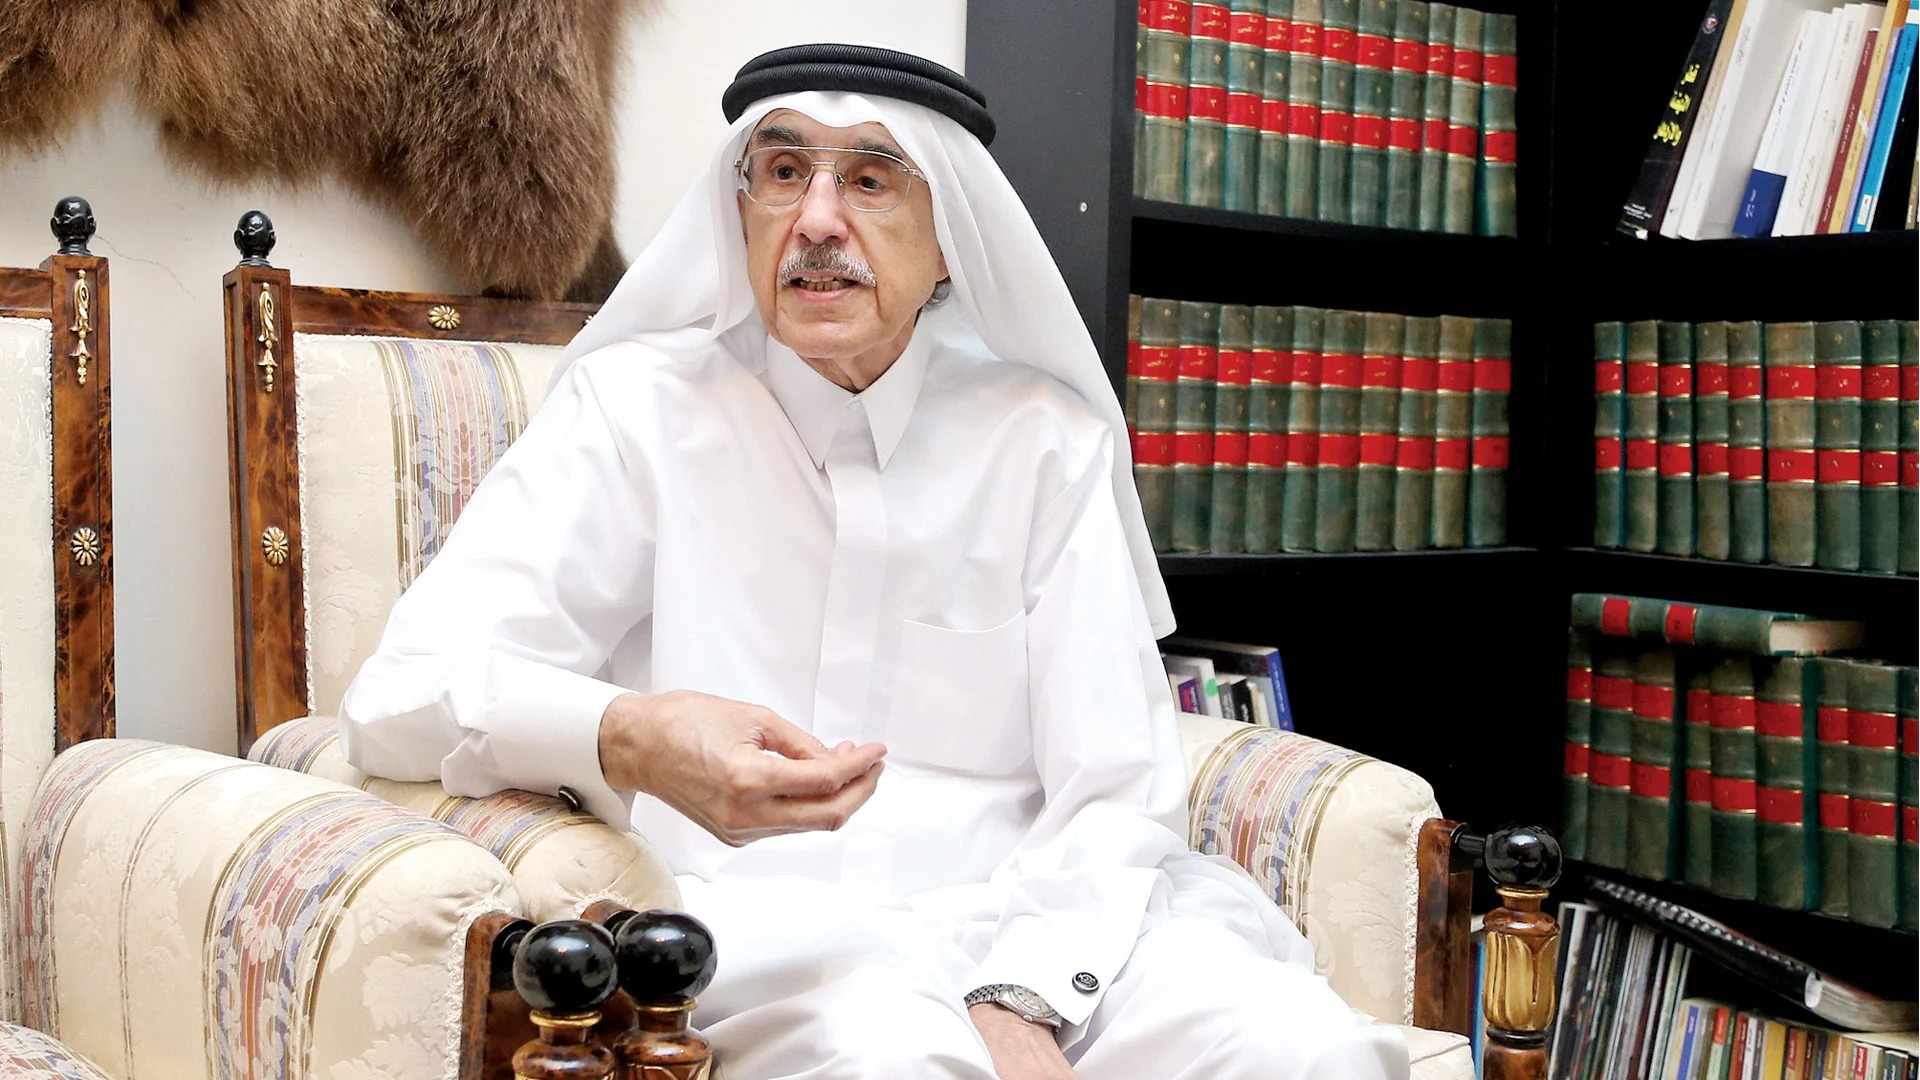 Arabic language is on the decline, especially in GCC countries: Dr. Mohammed Abdul-Rahim Kafoud